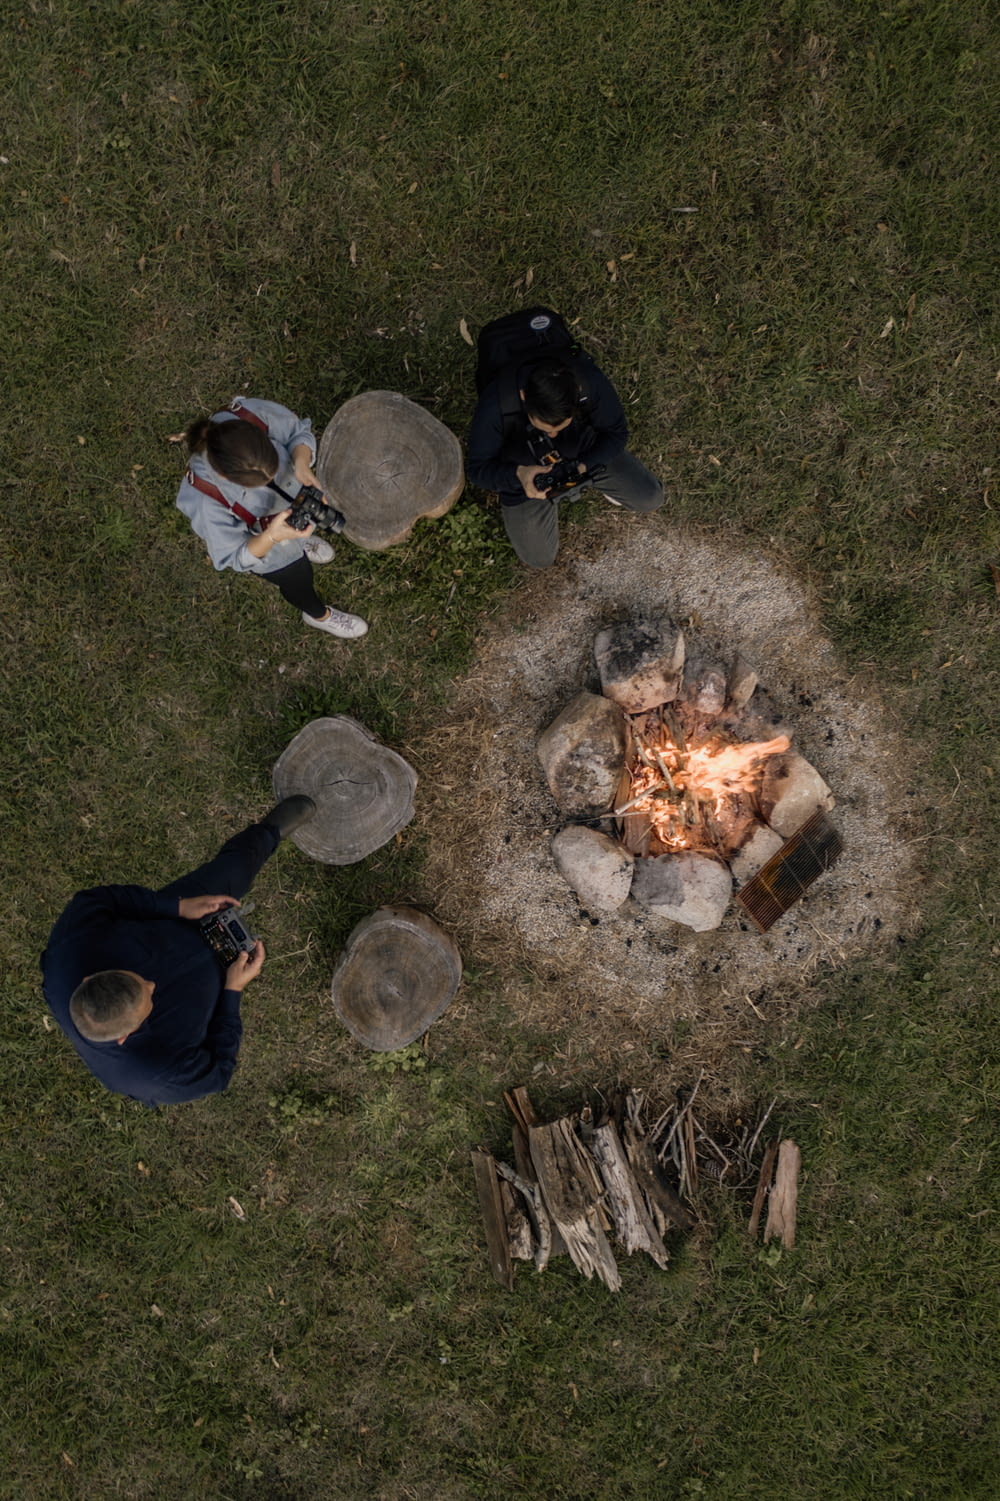 people sitting on grass field near bonfire during daytime